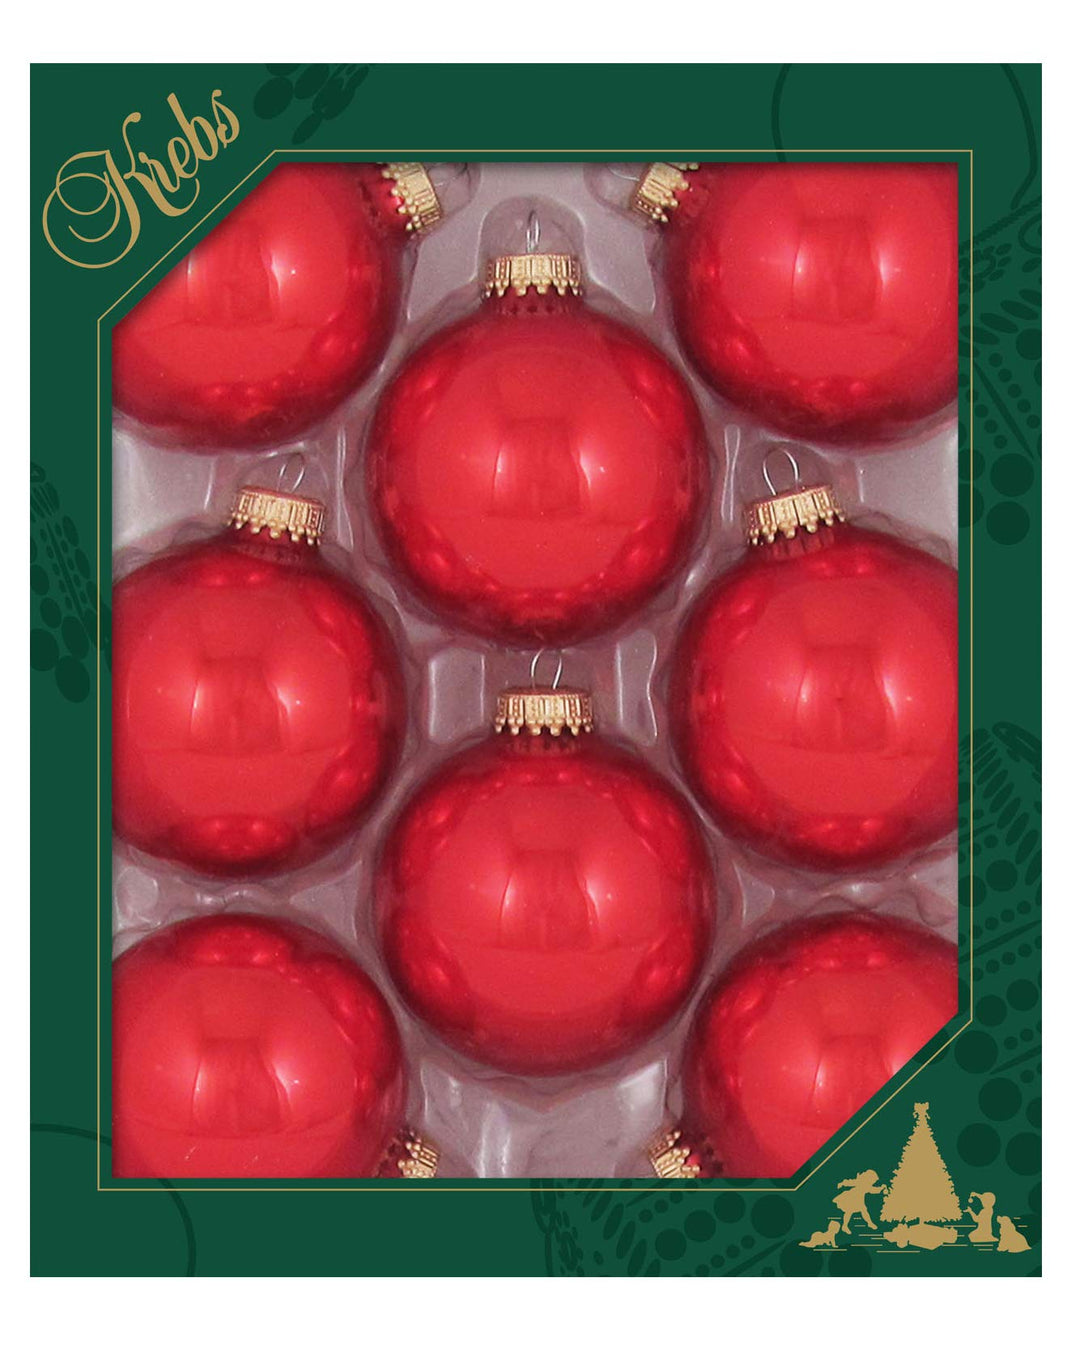 Christmas Tree Ornaments - 67mm / 2.625" [8 Pieces] Designer Glass Baubles from Christmas By Krebs - Handcrafted Seamless Hanging Holiday Decor for Trees (Candy Apple Red)